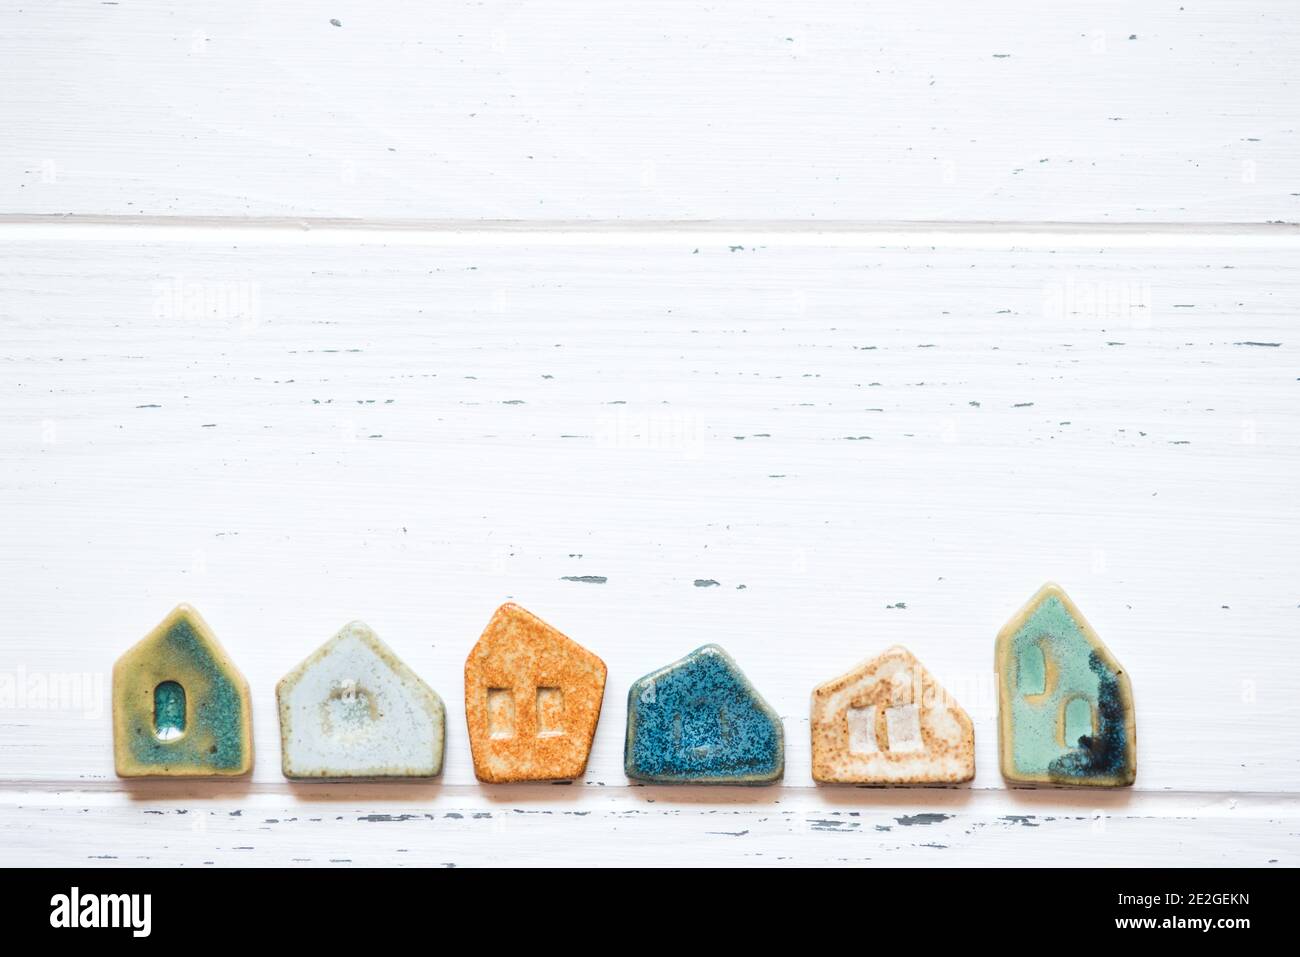 Colorful ceramic houses on a white wooden background. Stock Photo